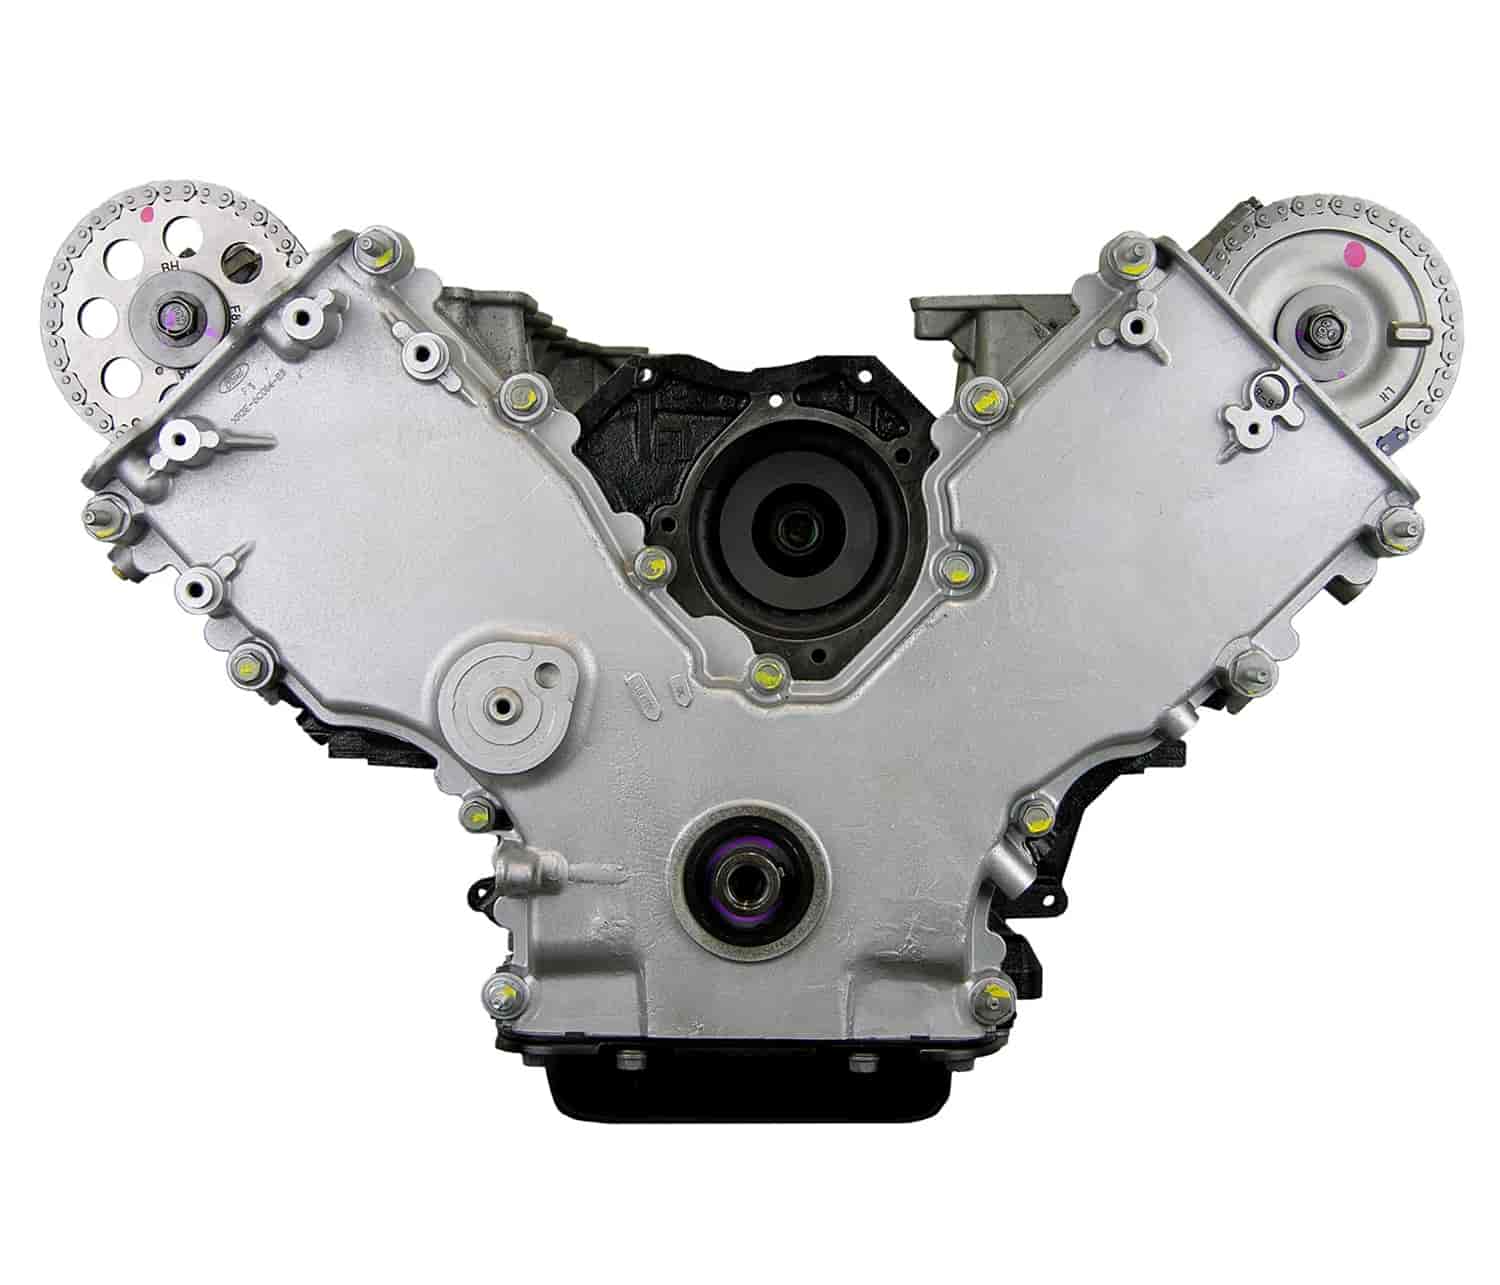 Remanufactured Crate Engine for 2001 Ford/Lincoln/Mercury Car with 4.6L V8